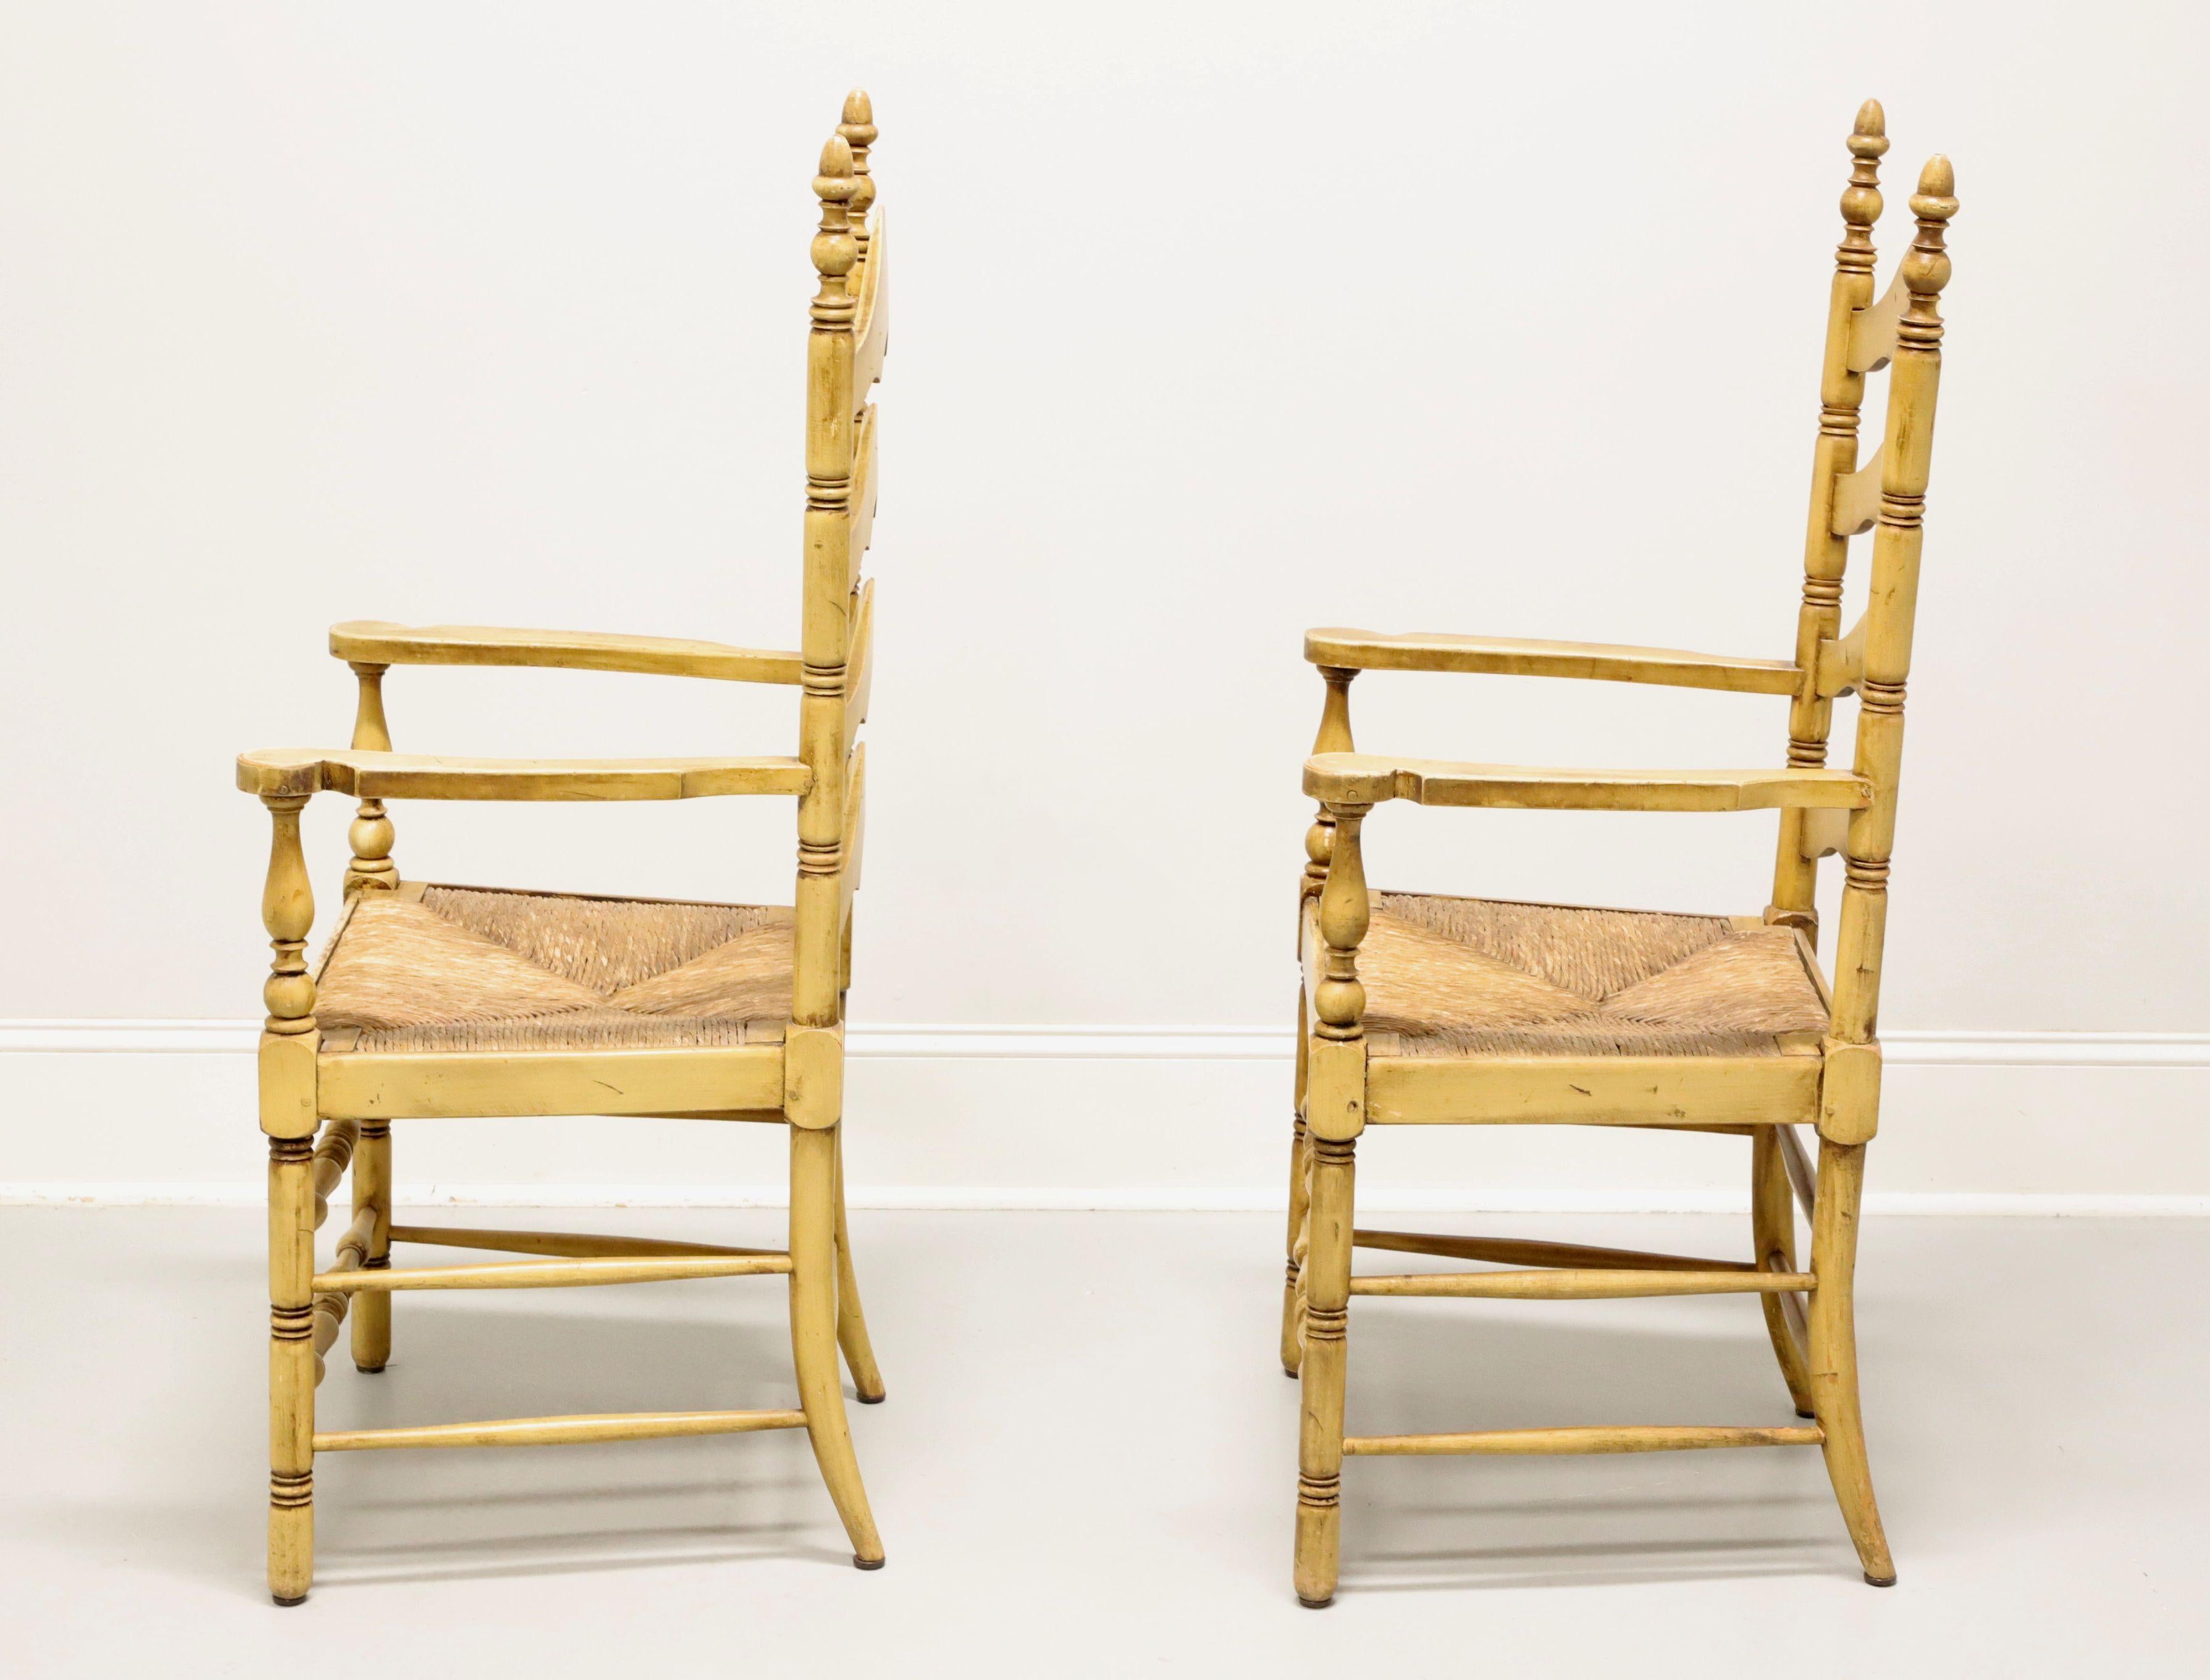 20th Century CAPE ANN CHAIRS Maple Ladder Back Dining Armchairs with Rush Seats - Pair For Sale